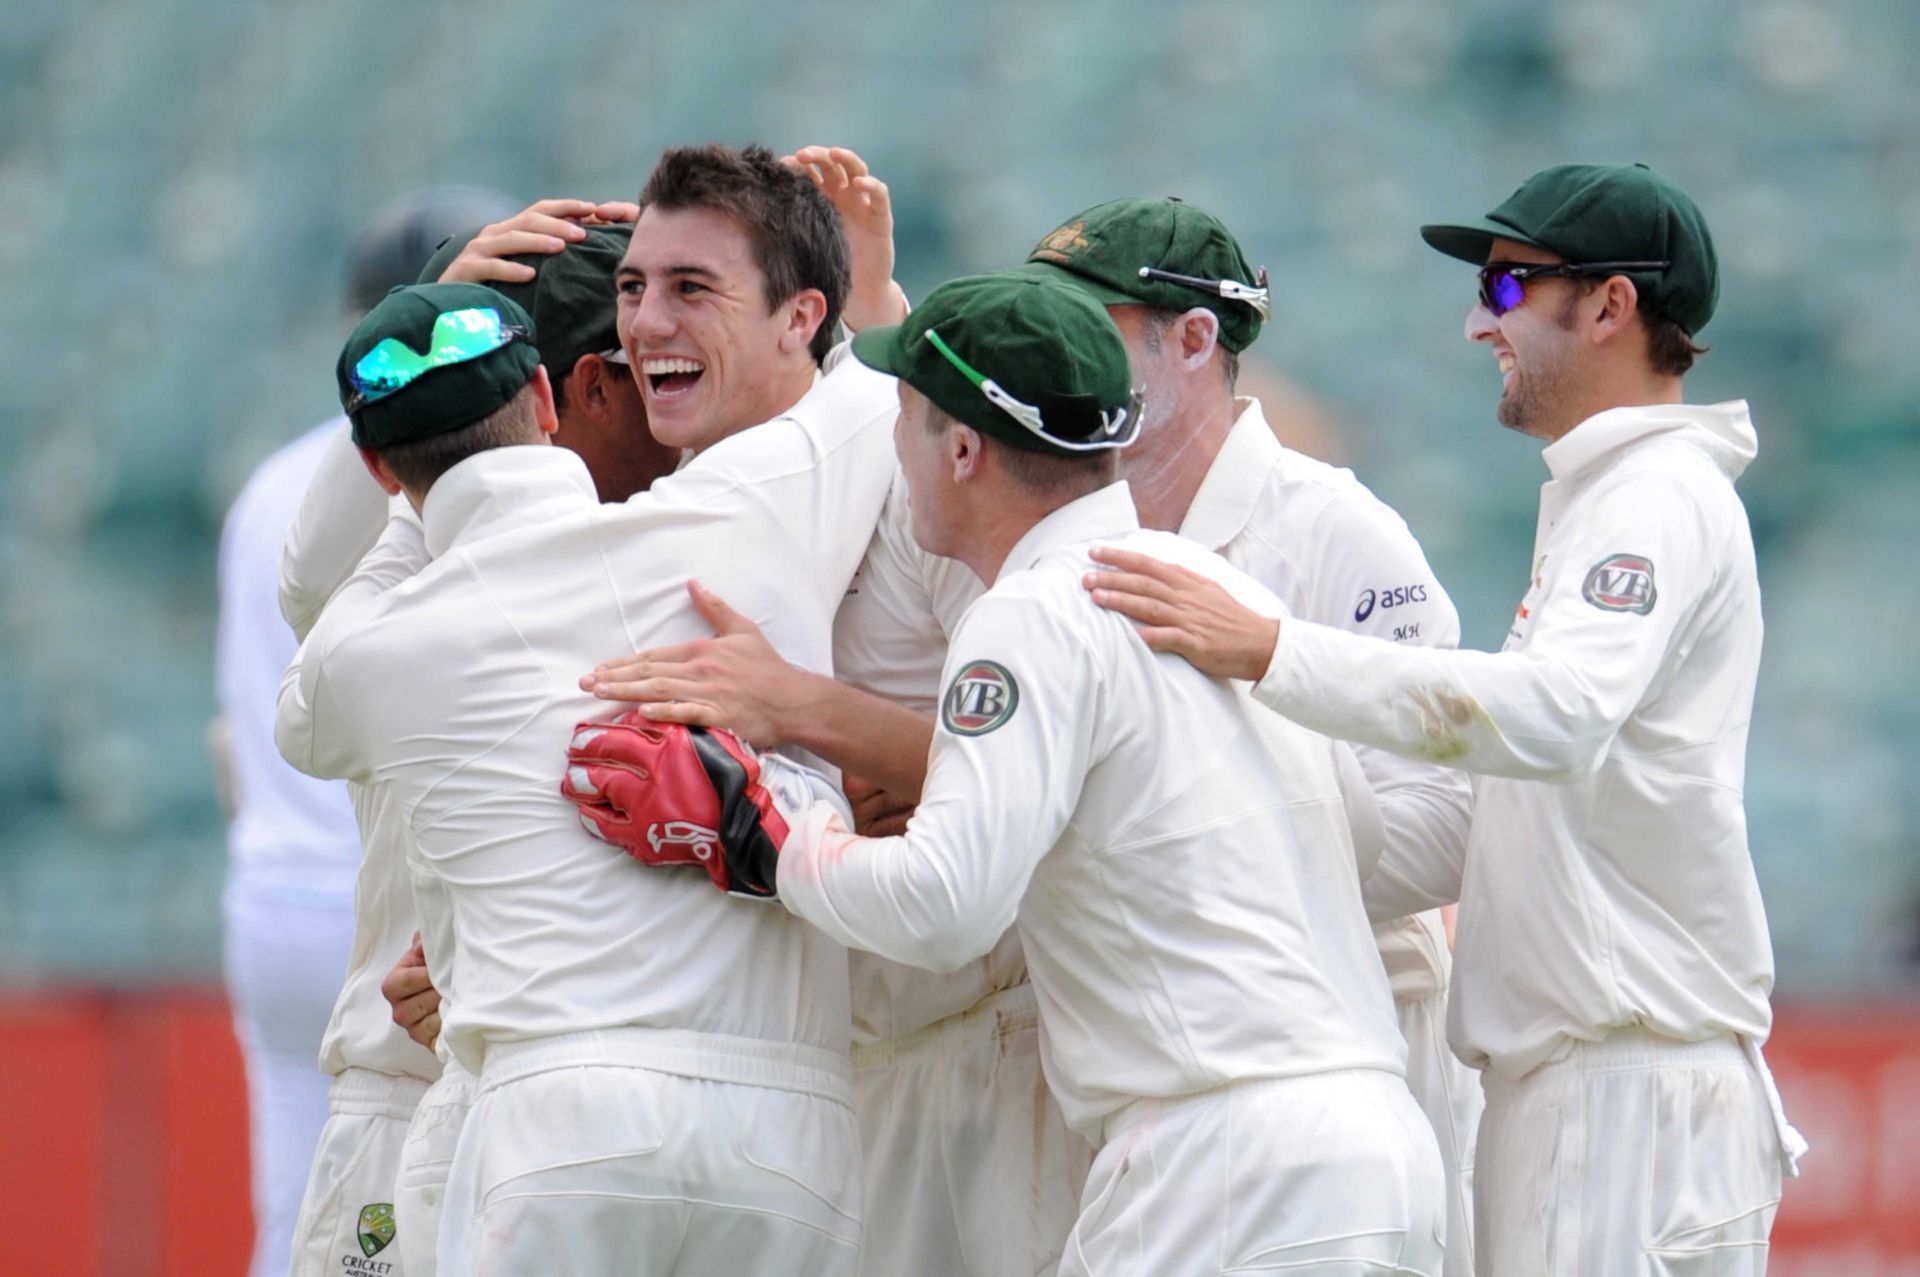 Pat Cummins celebrates his 1st Test wicket with teammates- Hashim Amla. Pic: Getty Images